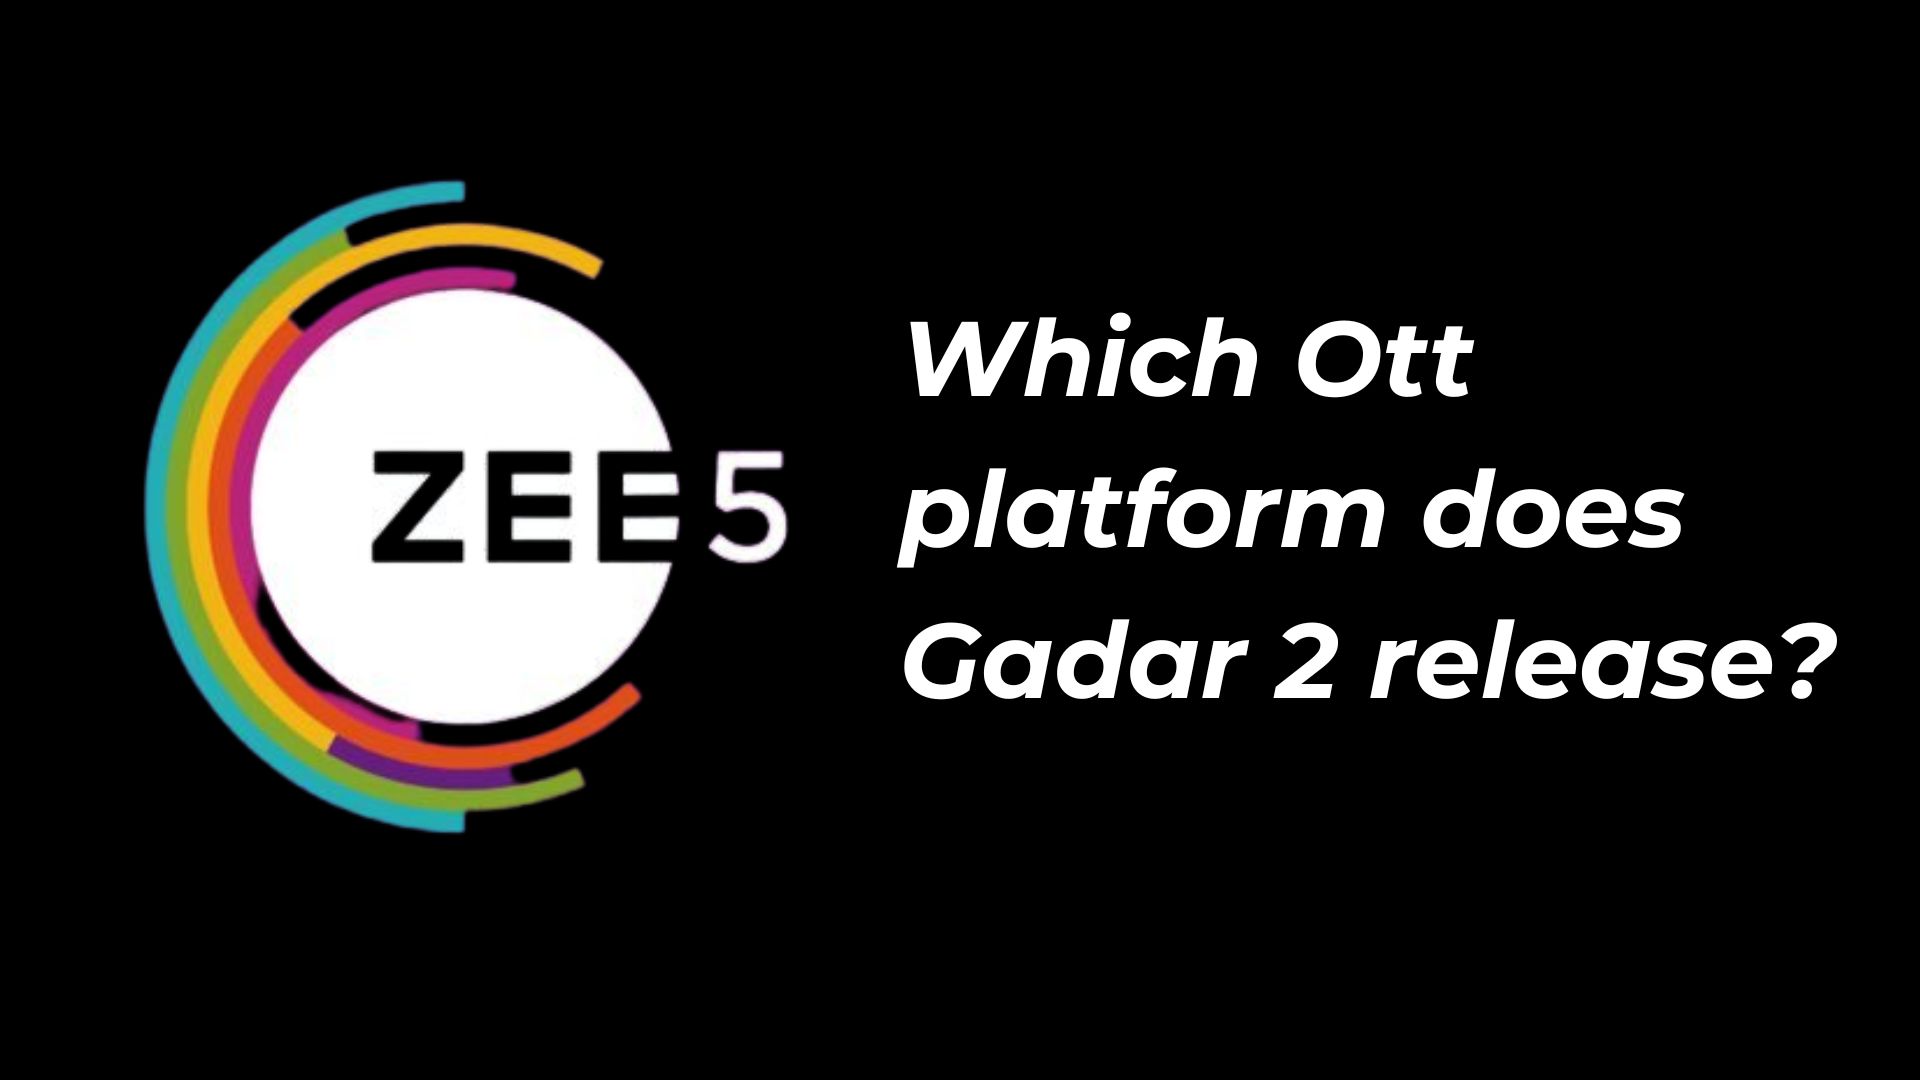 Gadar 2 will release on Zee5 OTT platform. Gadar 2 is produced by Zee Company. By releasing Gadar 2 on his OTT platform, the creator leveraged, the global reach and convenience of these platforms.